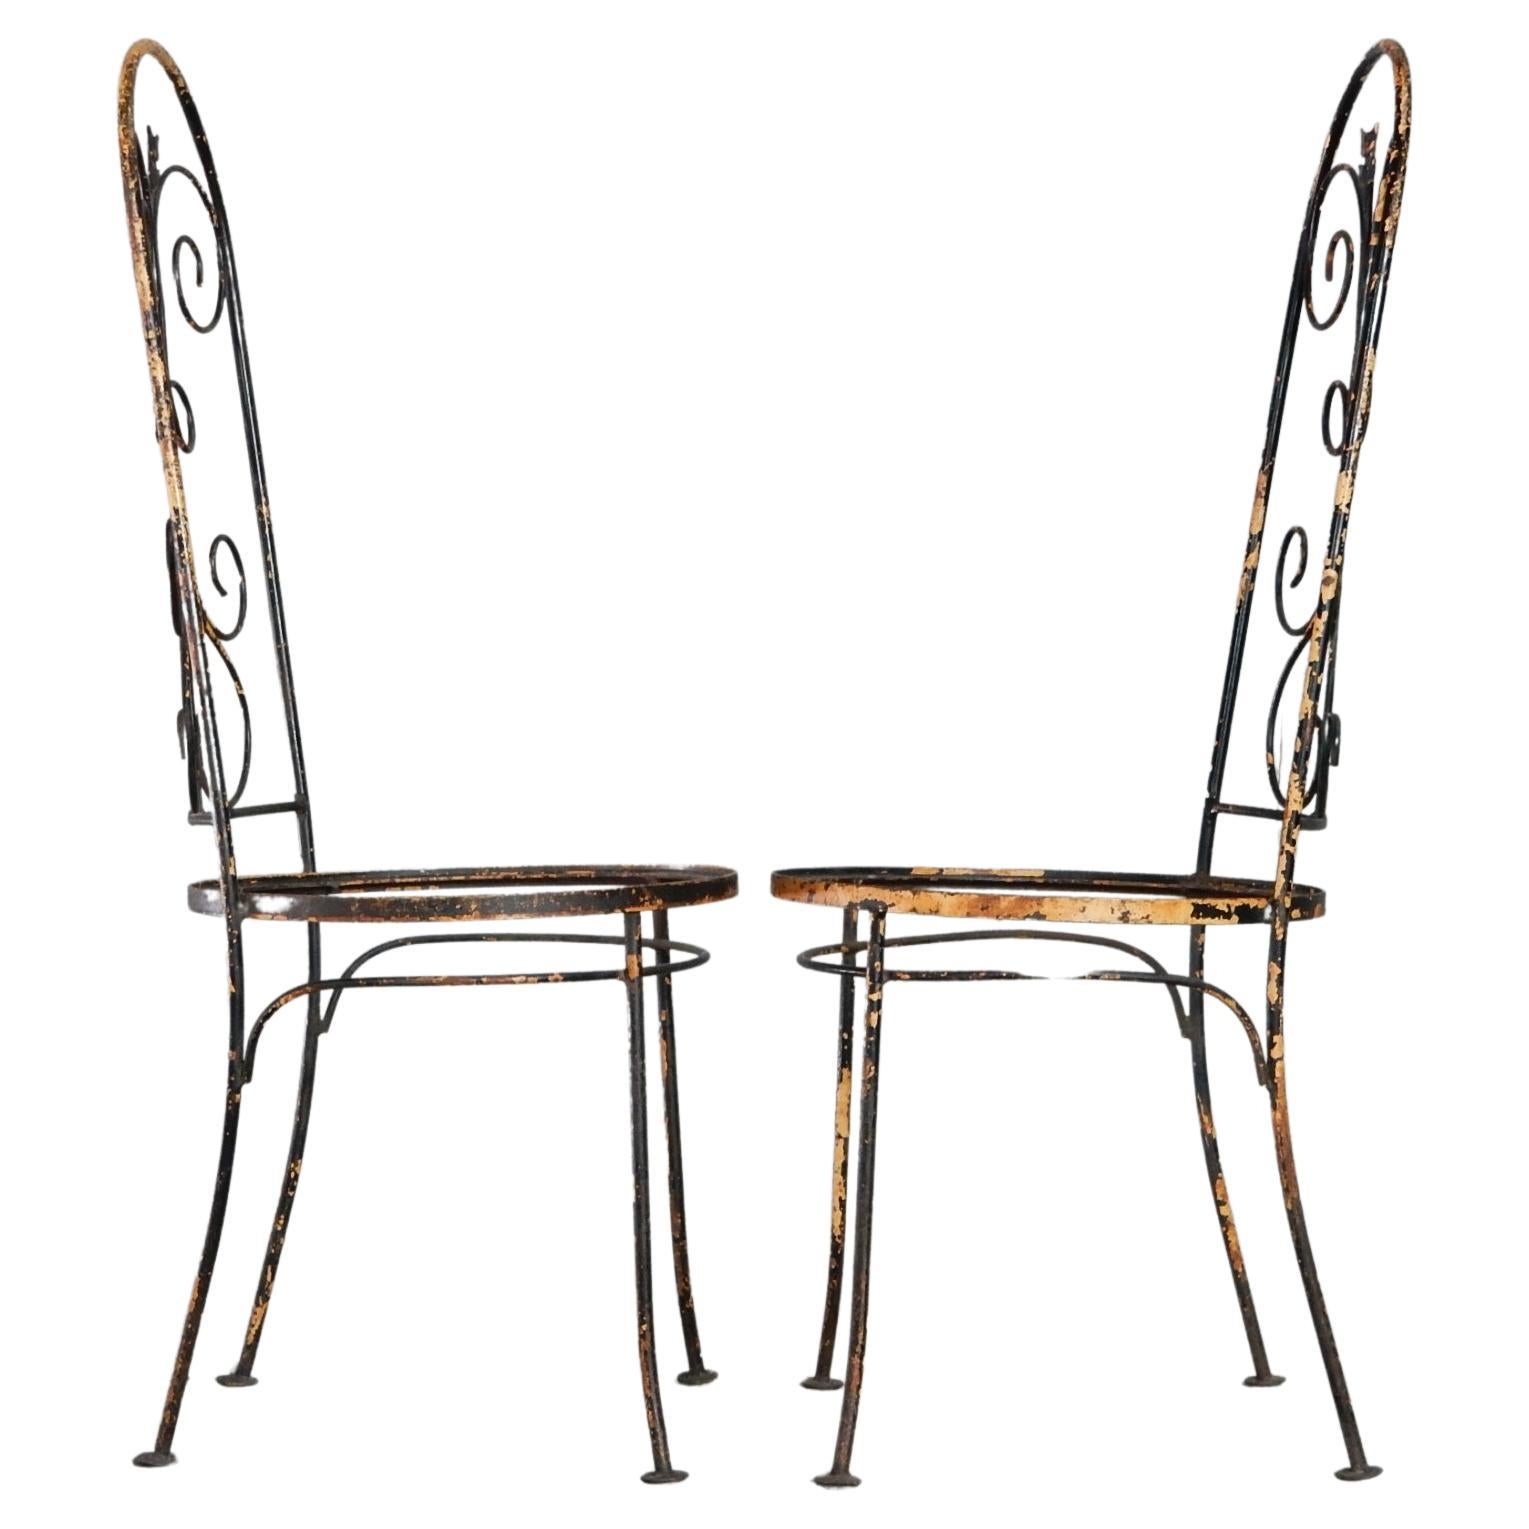 Wrought Iron 1940's French Artistic Iron Tall Back Garden Patio Chairs For Sale